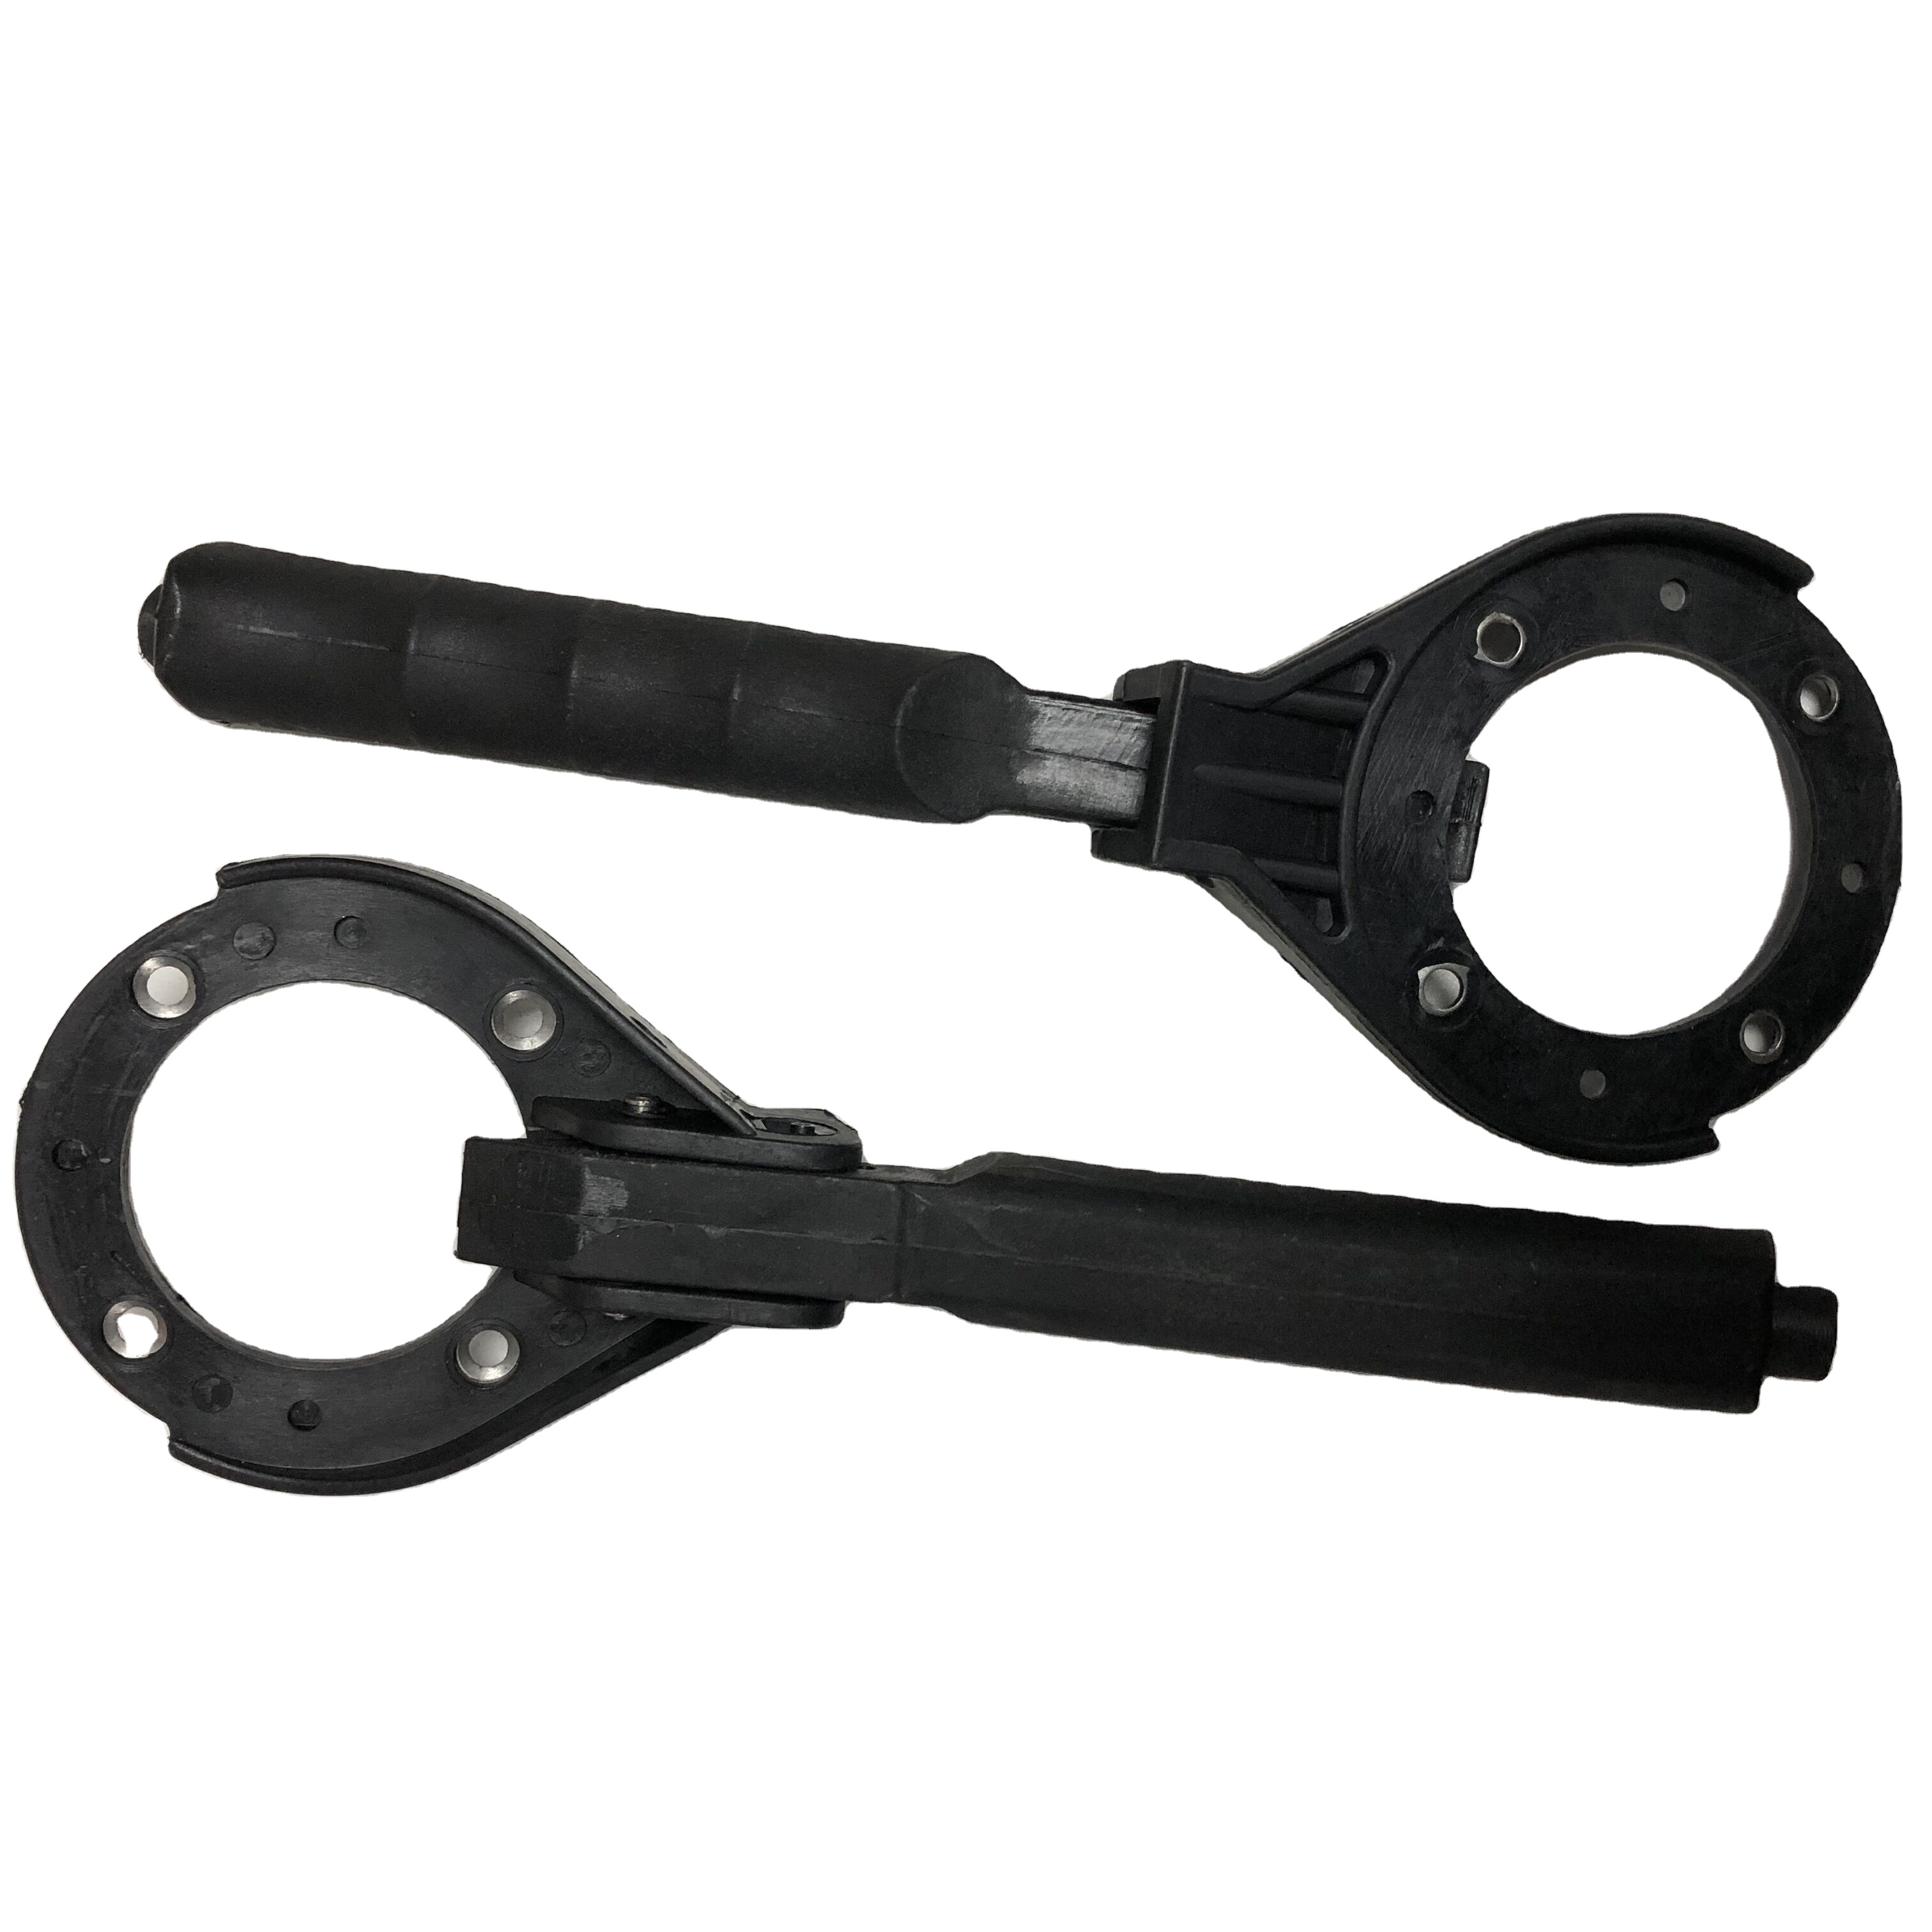 High Quality for Ssm Spare Parts - clamping lever for SSM machine – TOPT